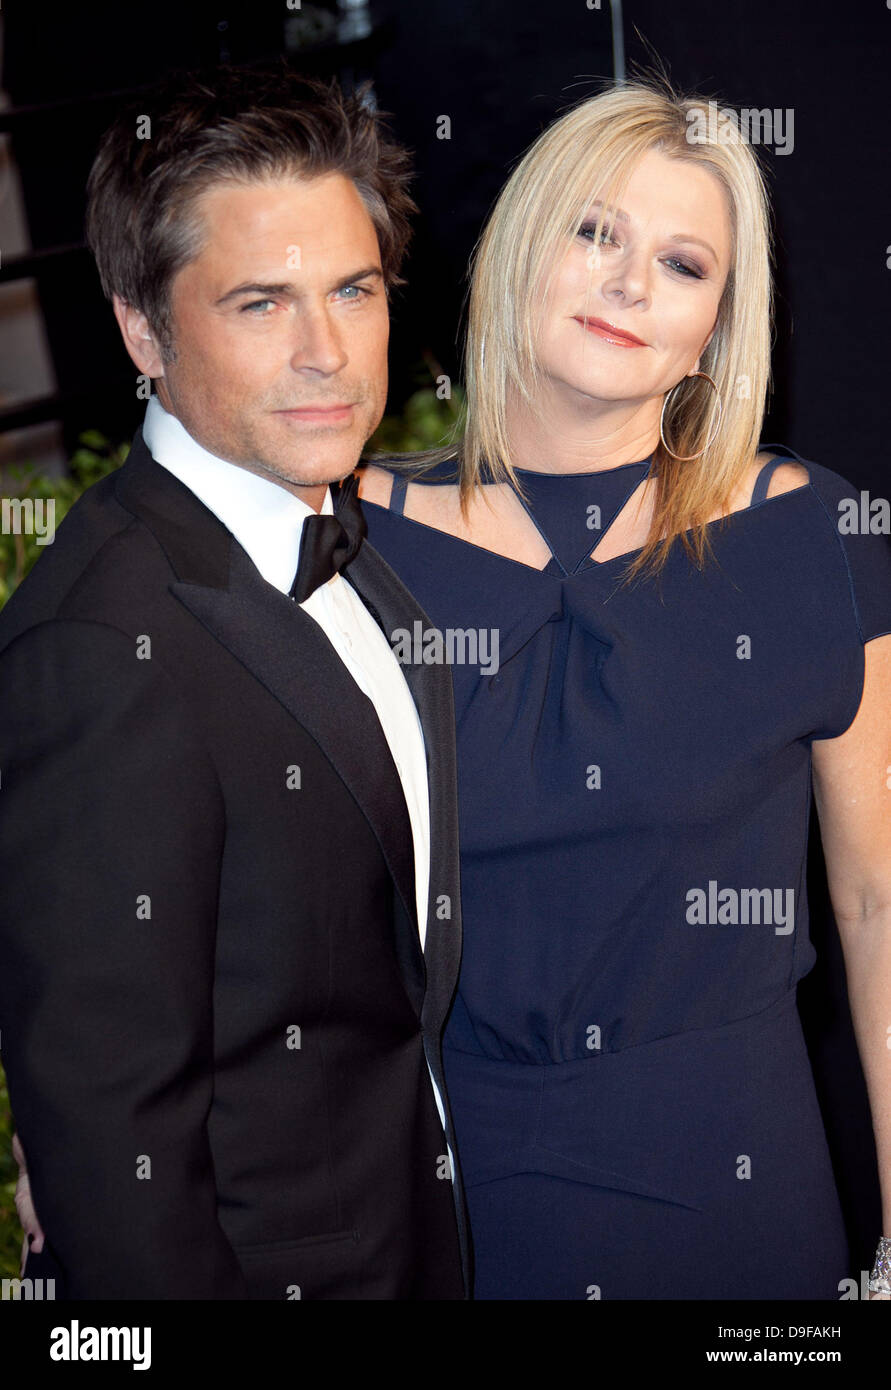 Rob Lowe and Sheryl Berkoff 2011 Vanity Fair Oscar Party at Sunset Tower Hotel - Arrivals West Hollywood, California - 27.02.11 Stock Photo